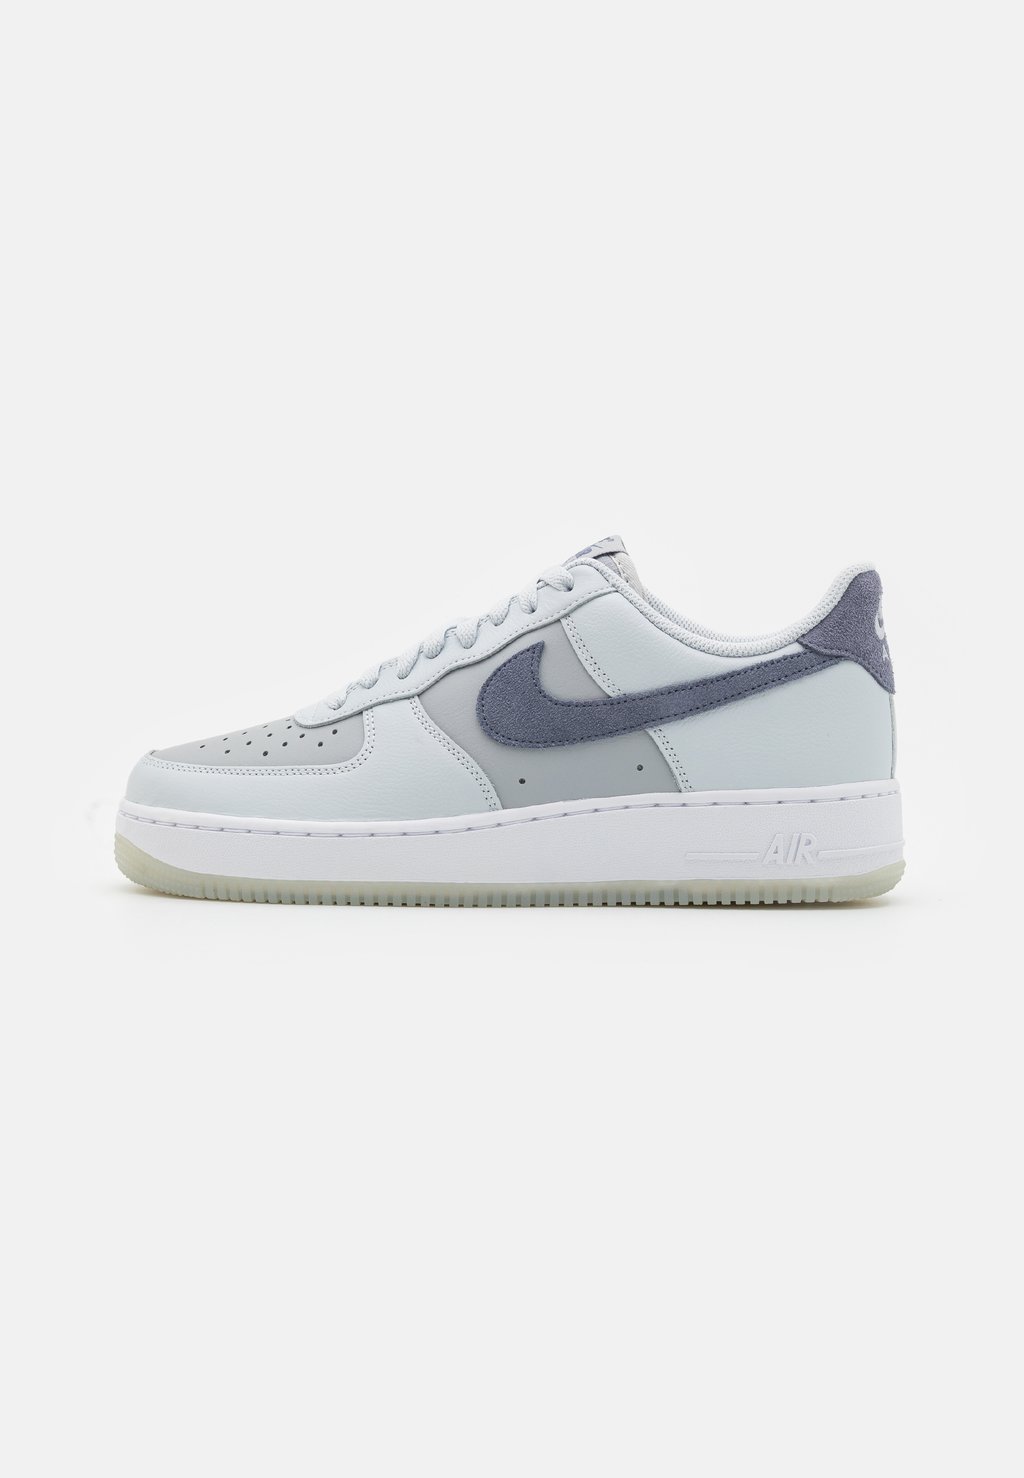 Низкие кроссовки Air Force 1 07 Lv8 Nike, цвет pure platinum/light carbon/wolf grey/white 2090 running shoes mens trainers womens chaussures wolf grey black grape pure platinum triple white designer sneakers sports